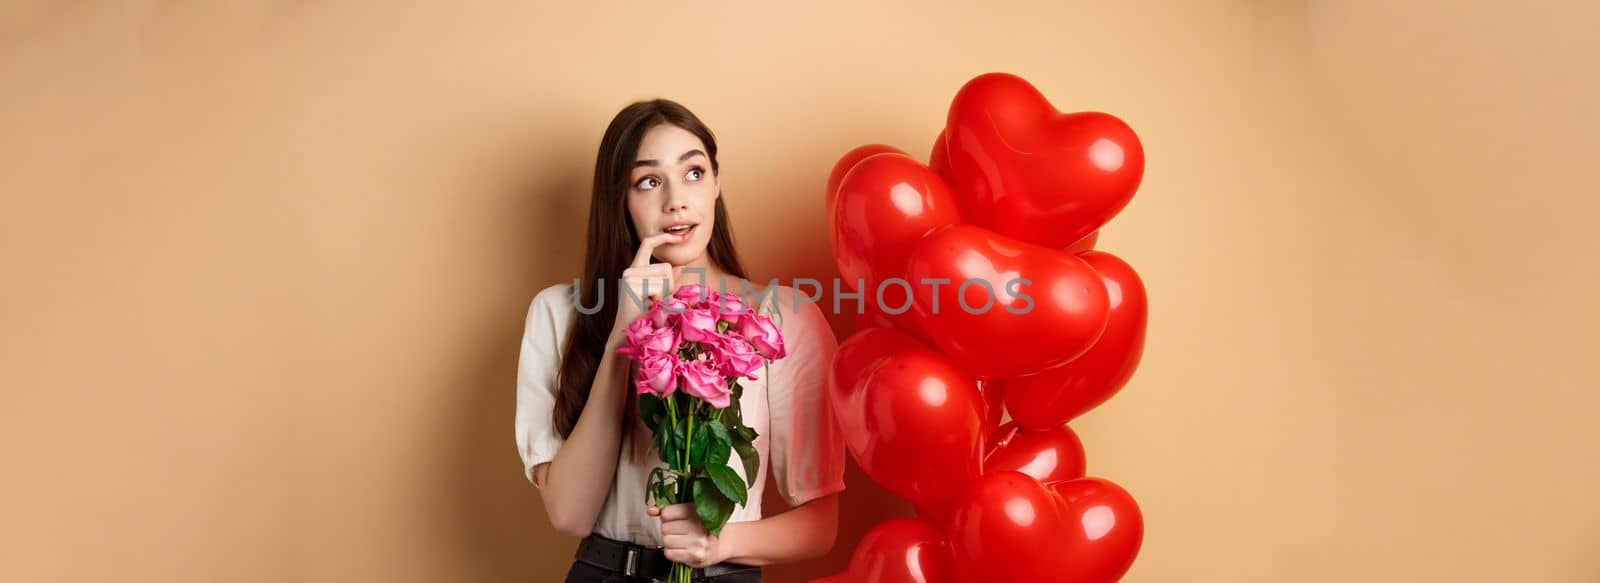 Dreamy young woman holding bouquet of roses and thinking about secret admirer on Valentines day, looking at upper left corner and biting finger, standing near red romantic balloons.